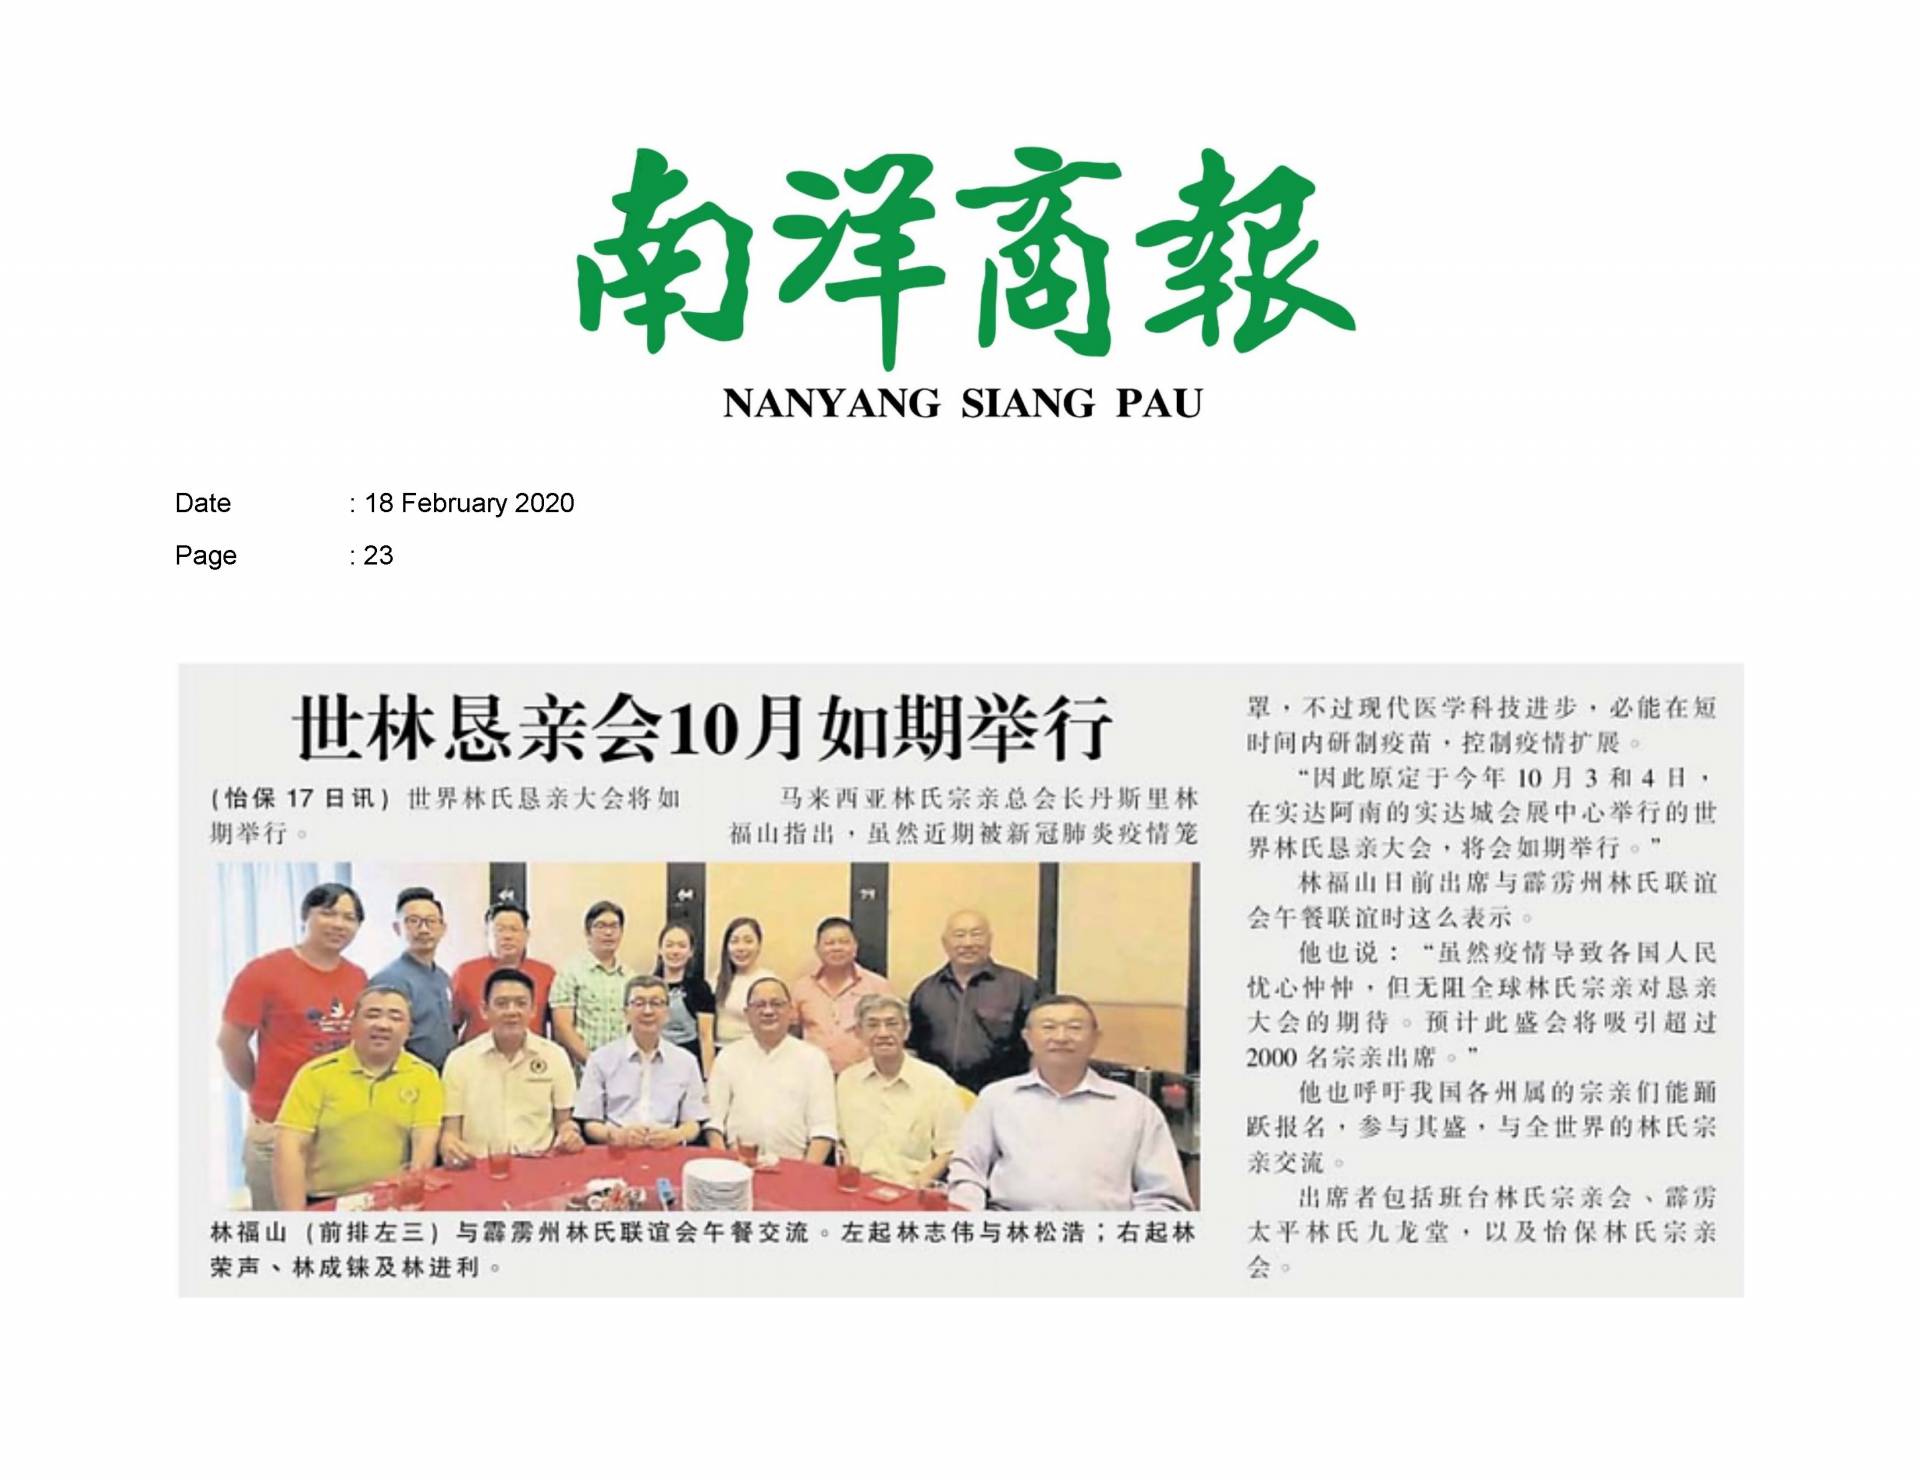 2020.02.18 Nanyang - World Lim_s Association general meeting to be held in Oct as scheduled